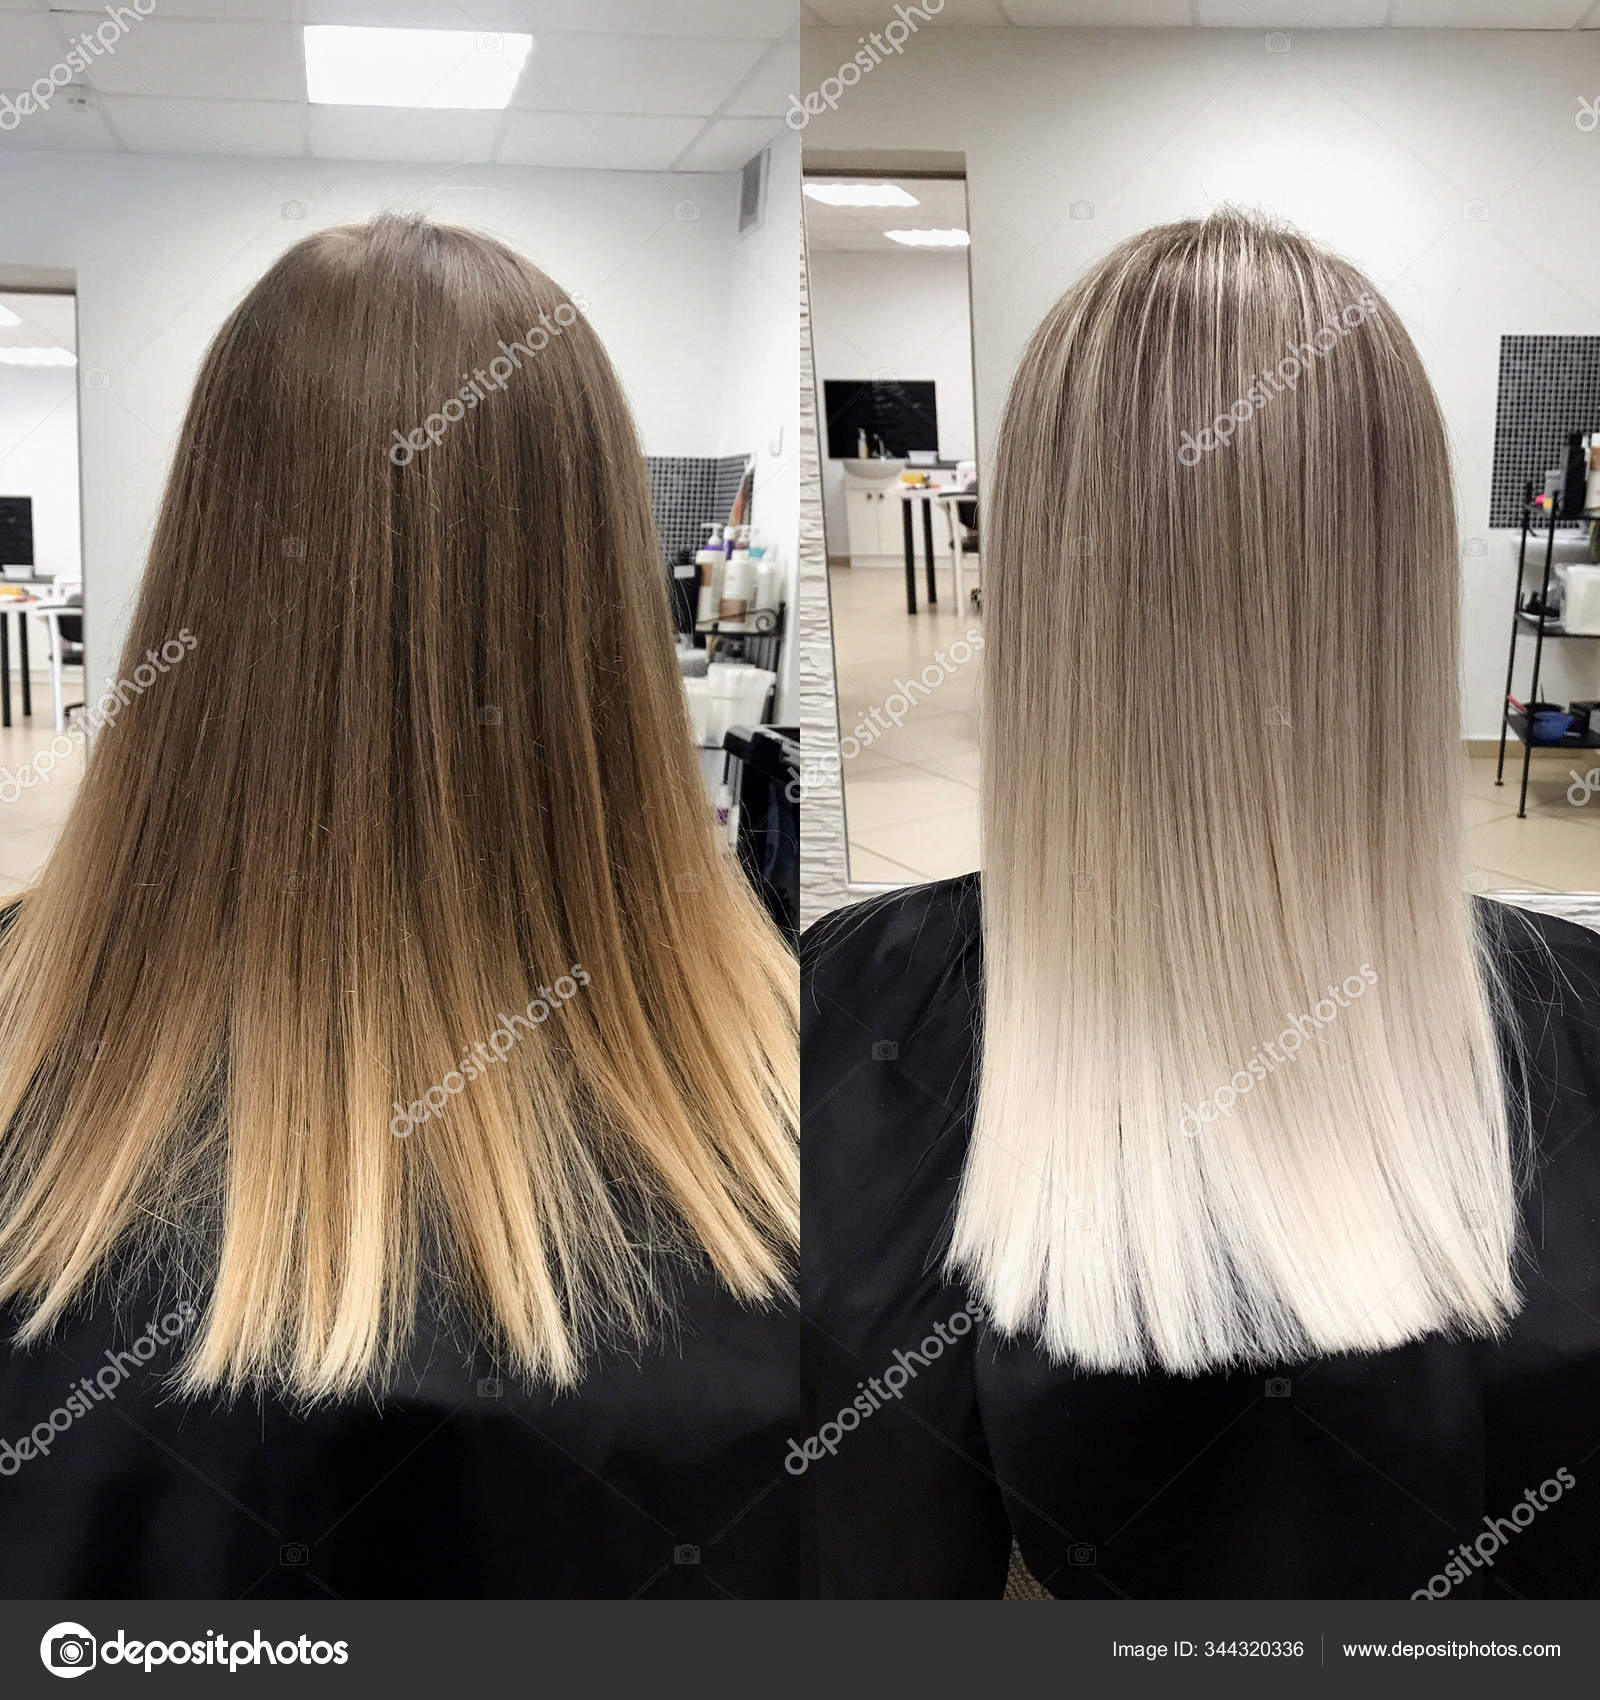 Before and after hair color in cool tones Stock Photo by  © 344320336